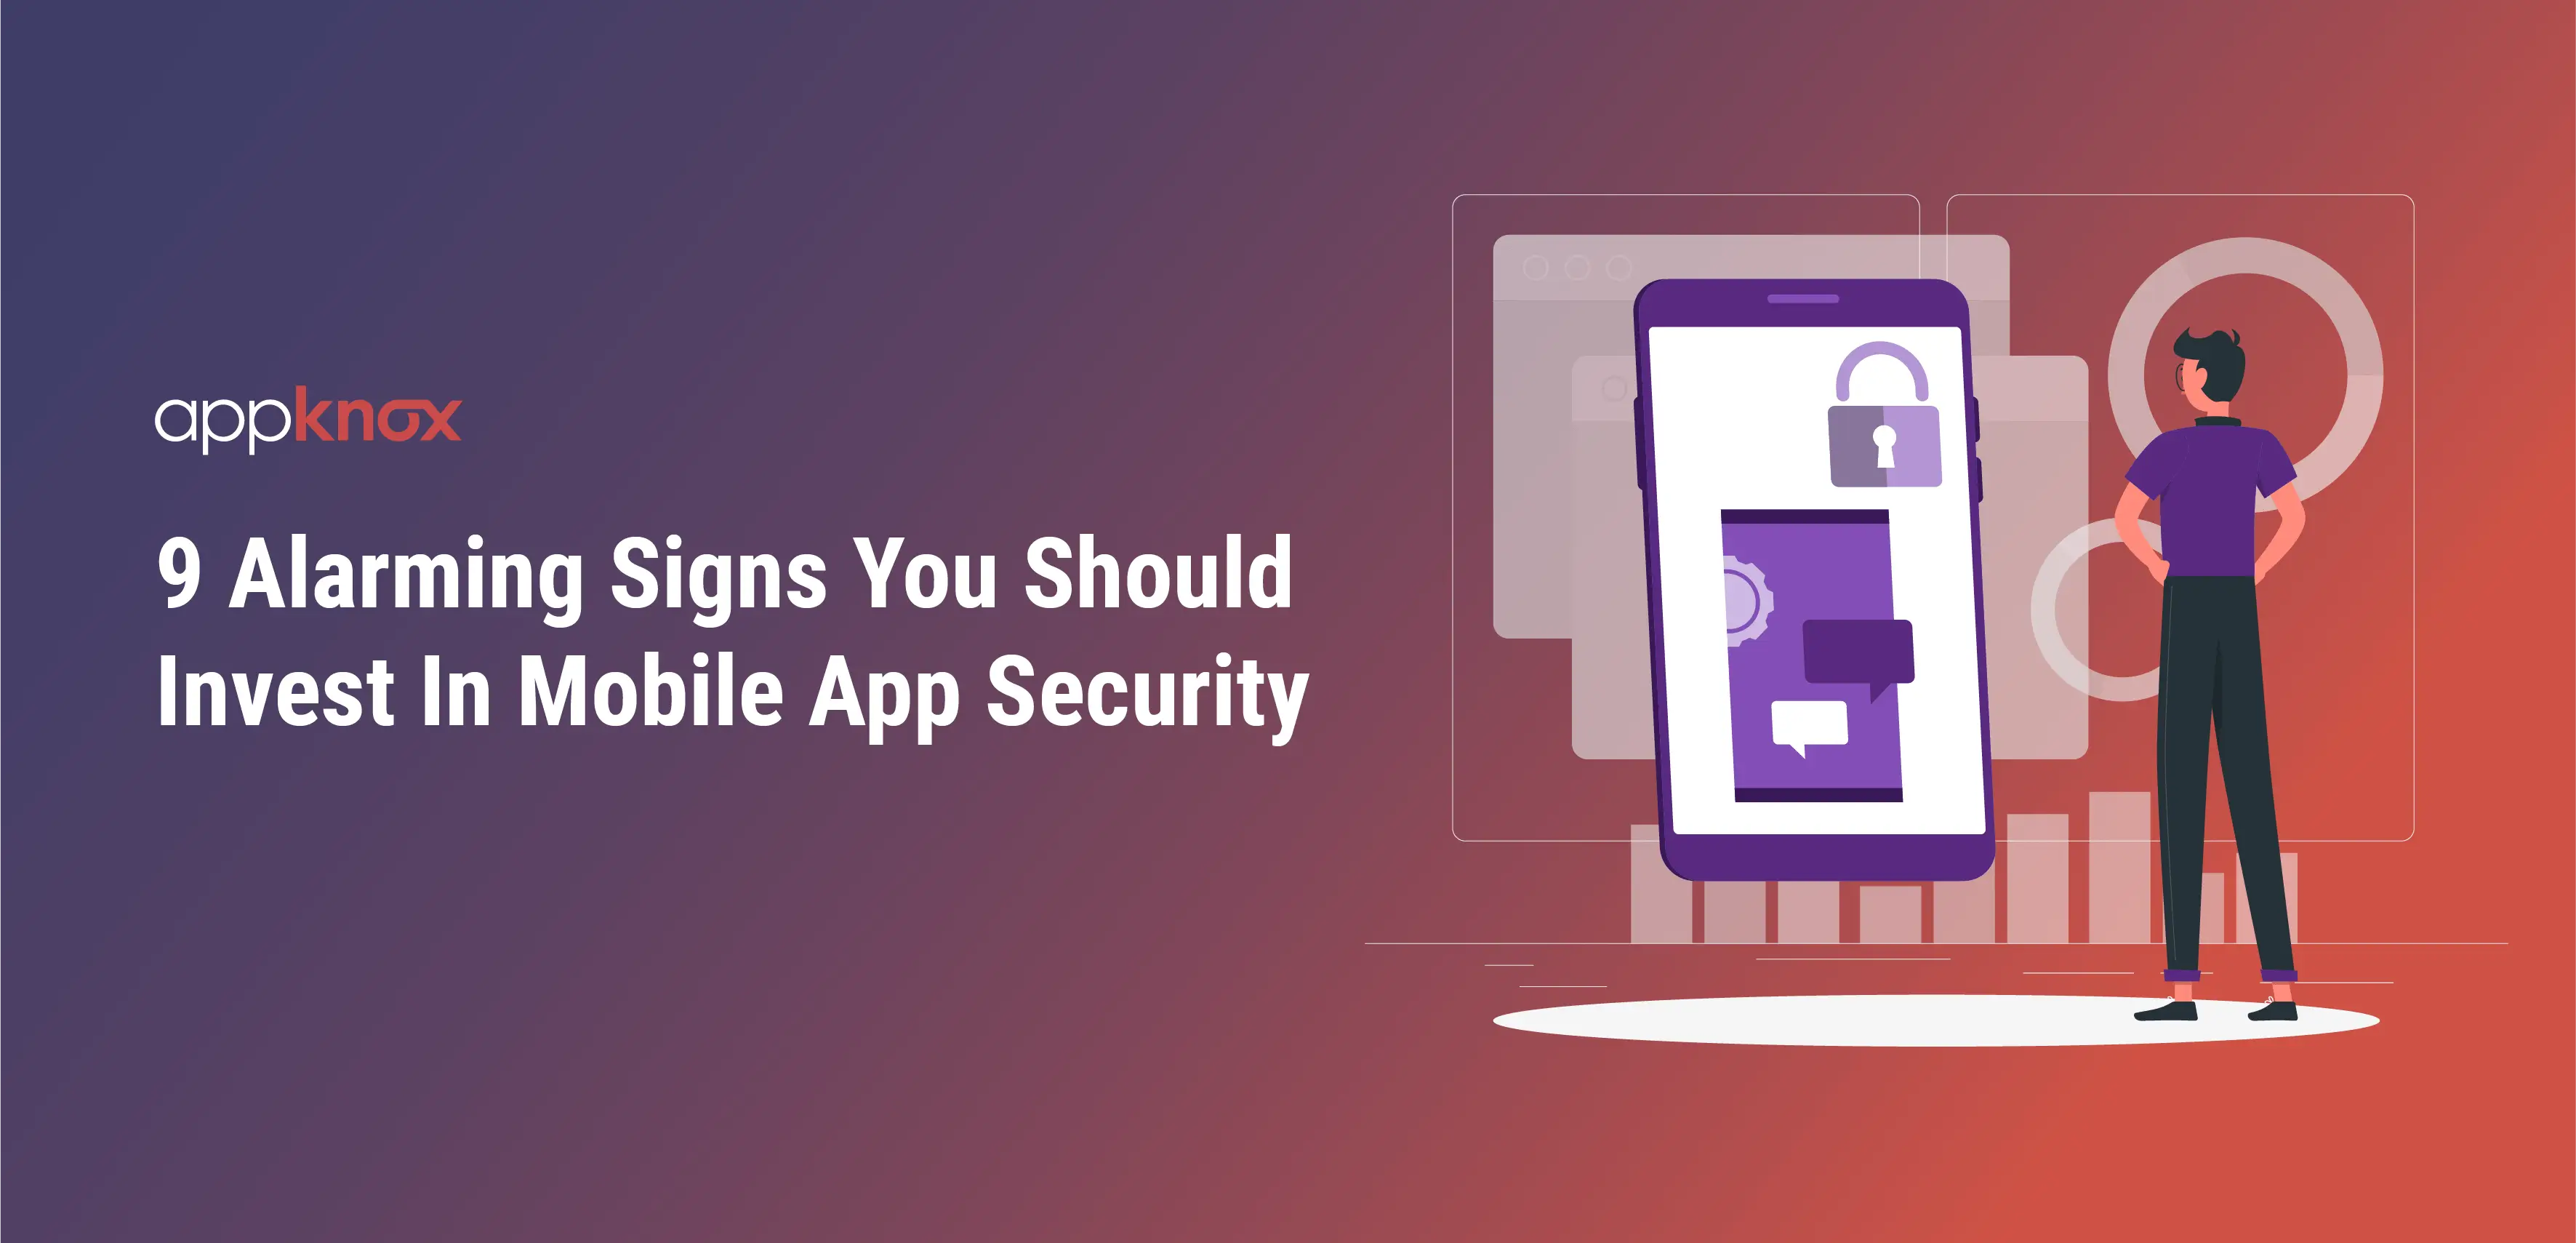 9 Alarming Signs You Should Invest In Mobile App Security